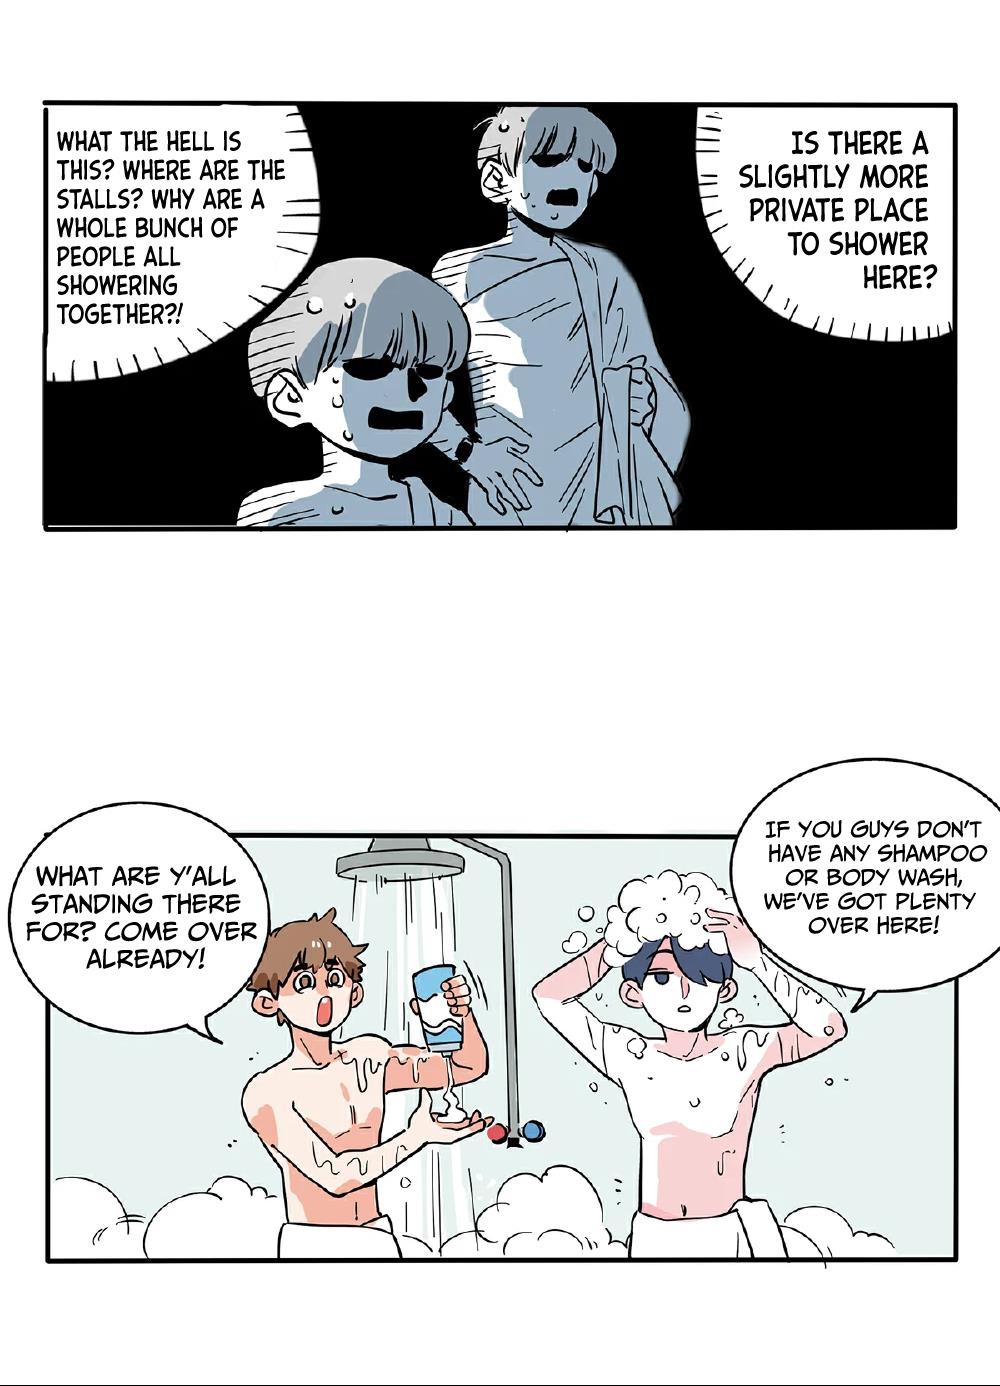 Please Take My Brother Away! - Page 3